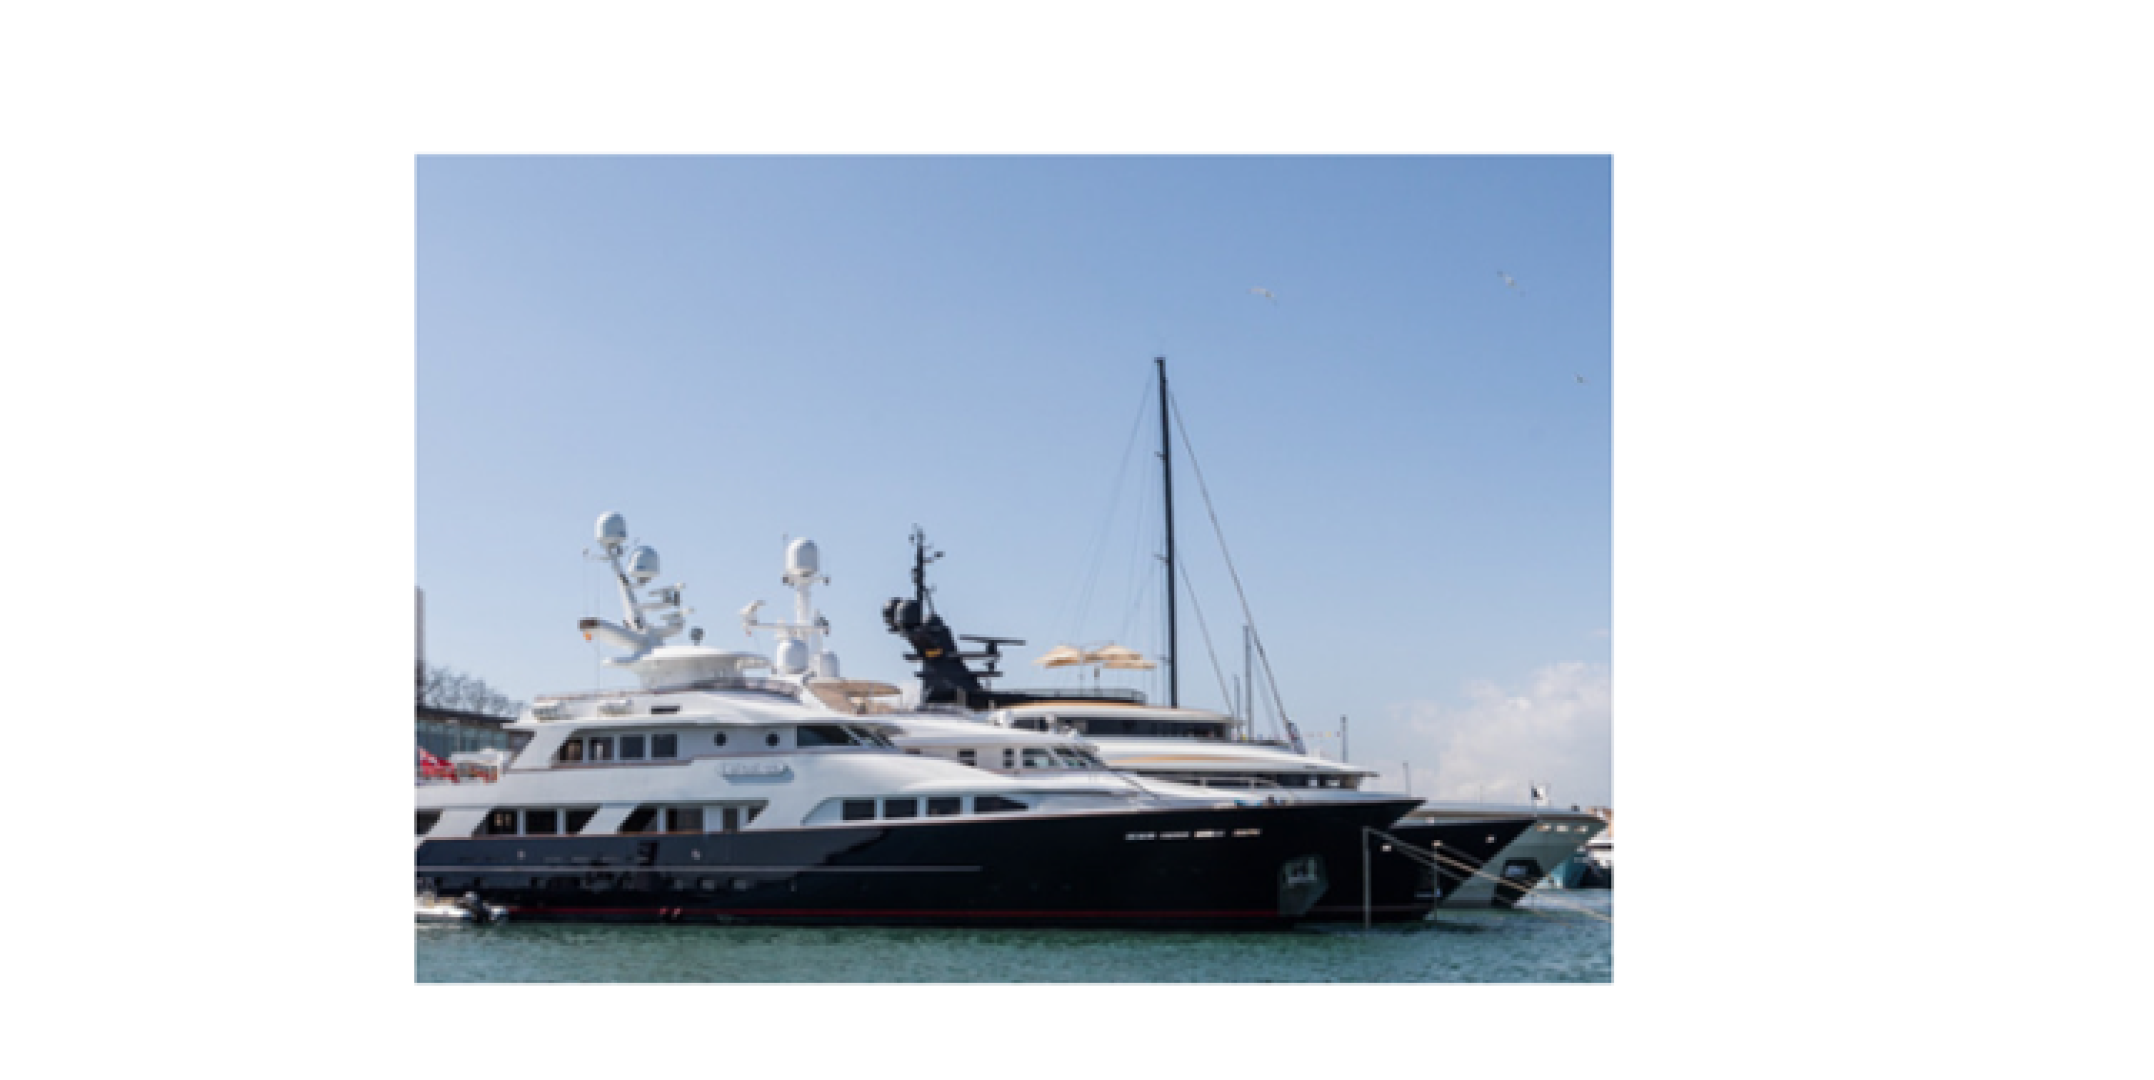 The 2022 MYBA Charter Show is making a return to Marina Port Vell